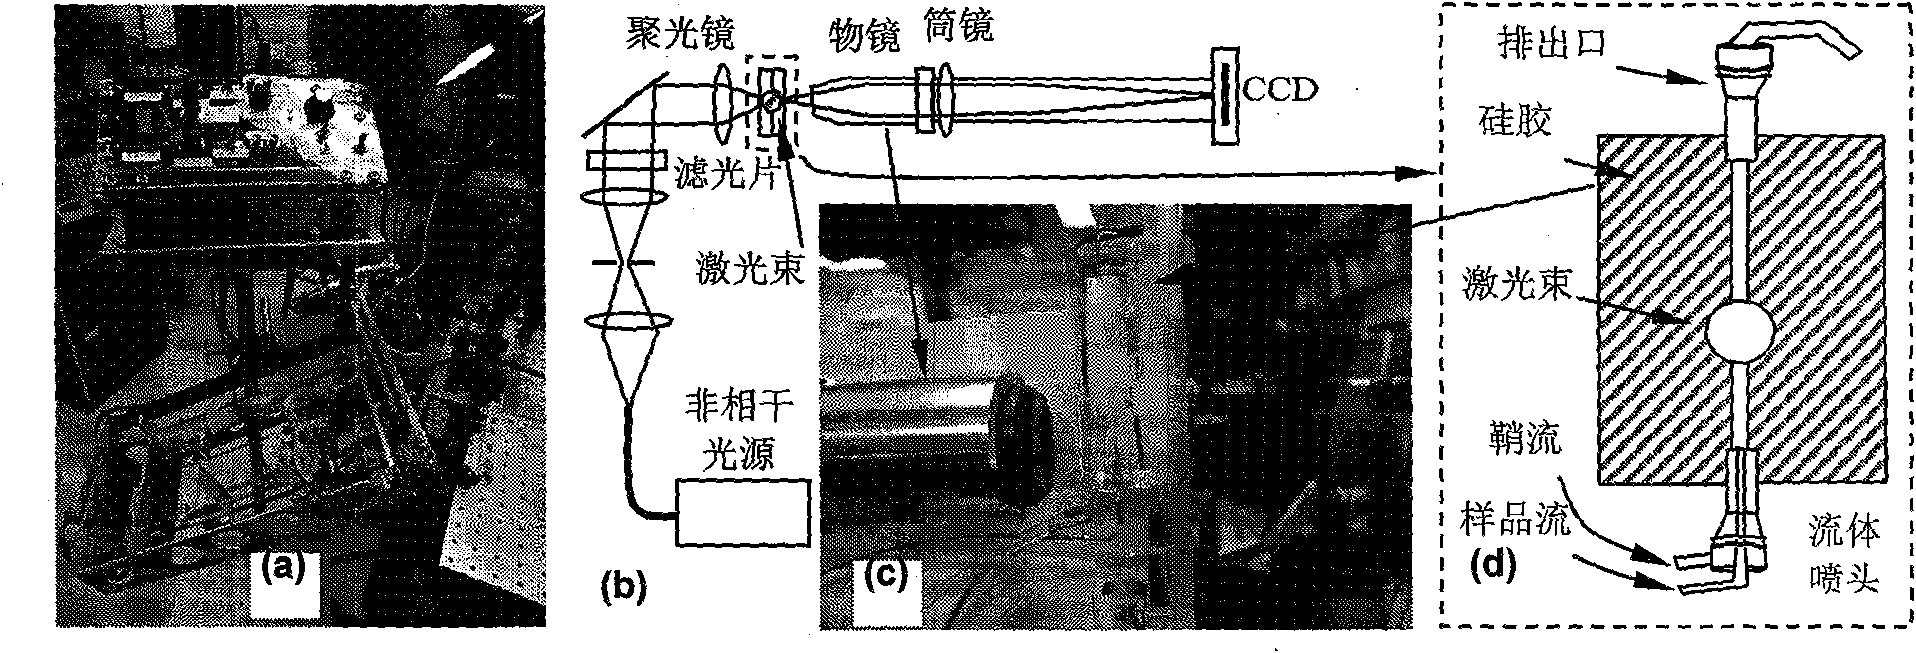 Flow cytometer apparatus for three dimensional diffraction imaging and related methods